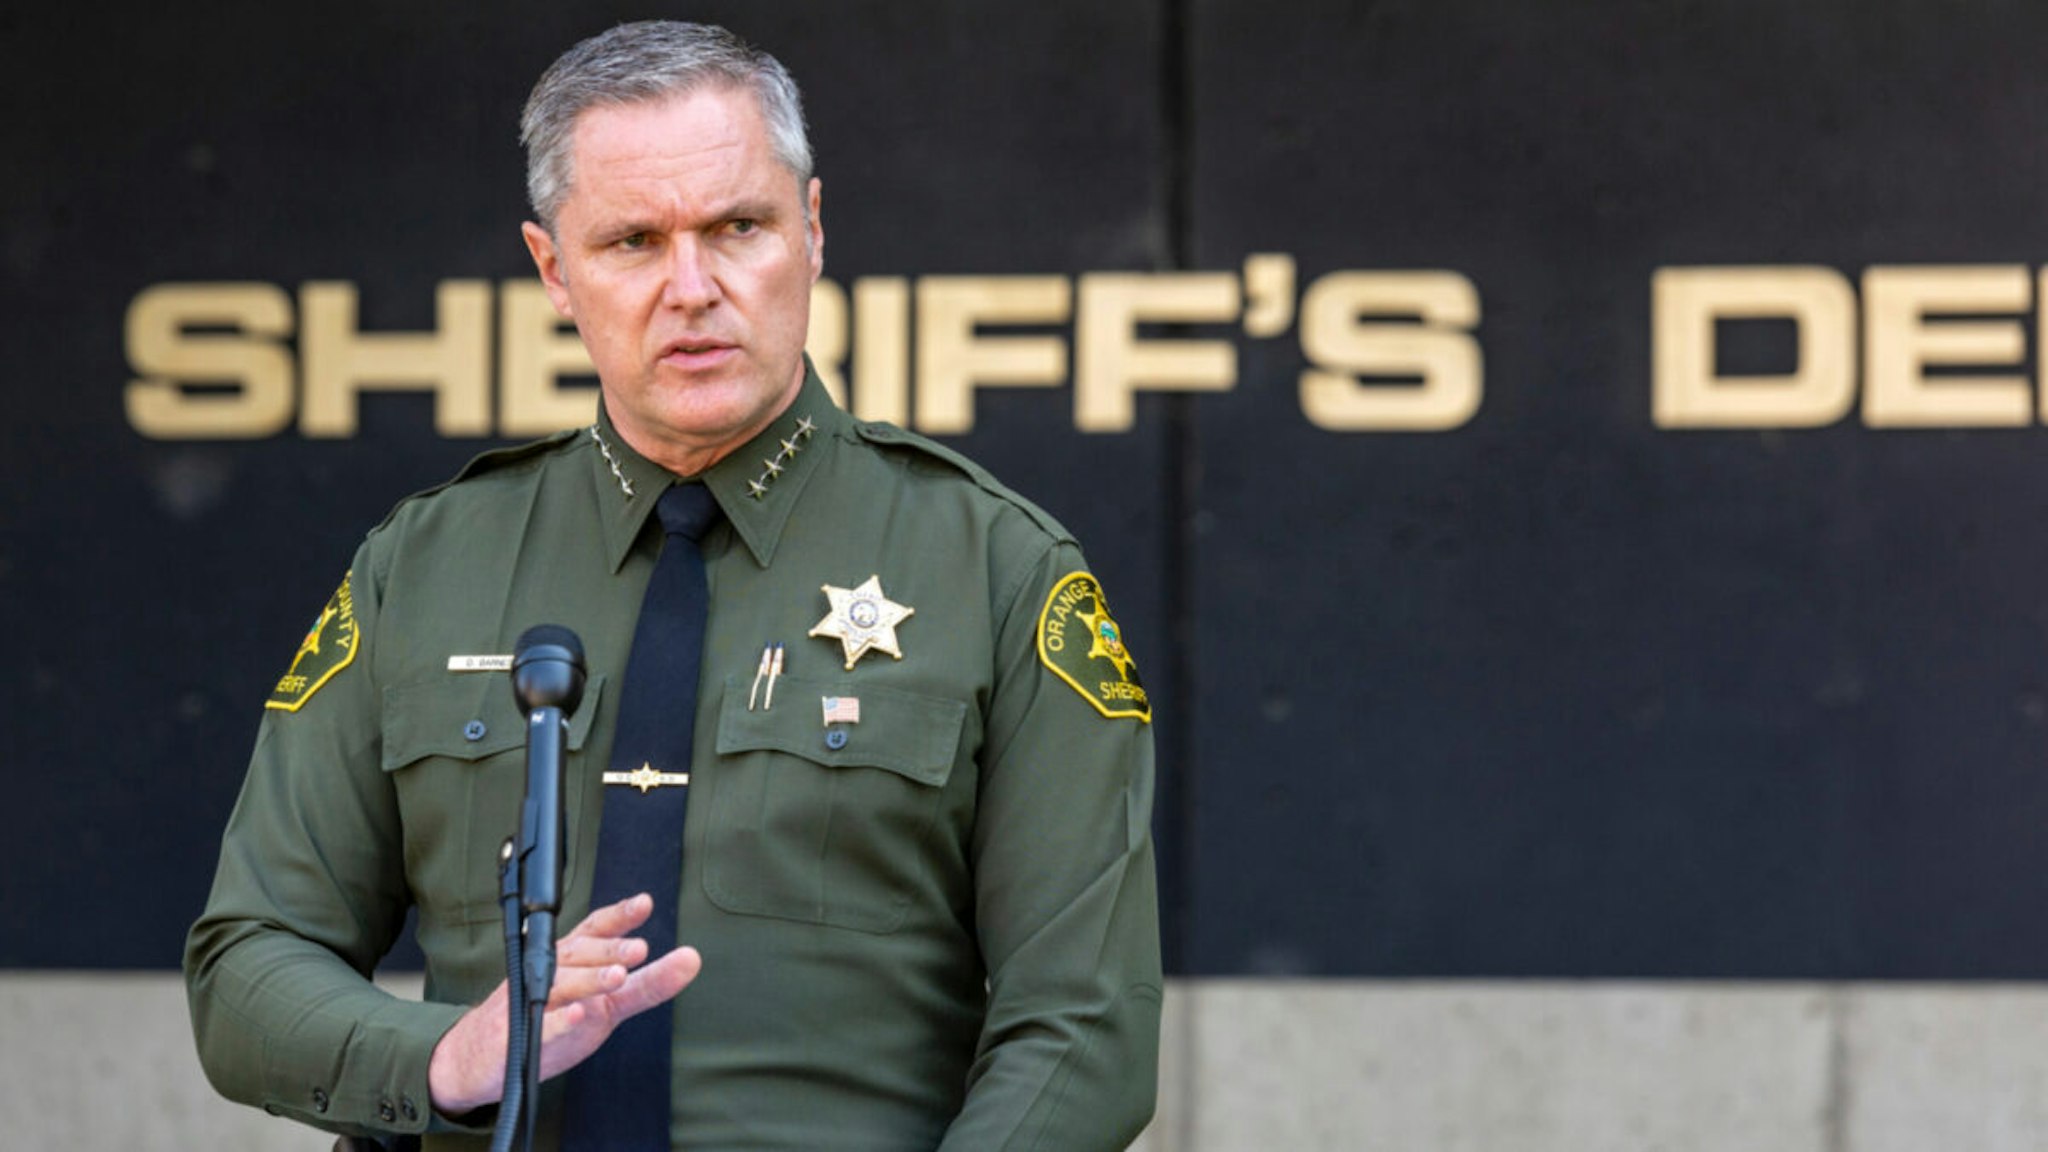 Orange County Sheriff Don Barnes holds a press conference in Santa Ana on Thursday, September 24, 2020.